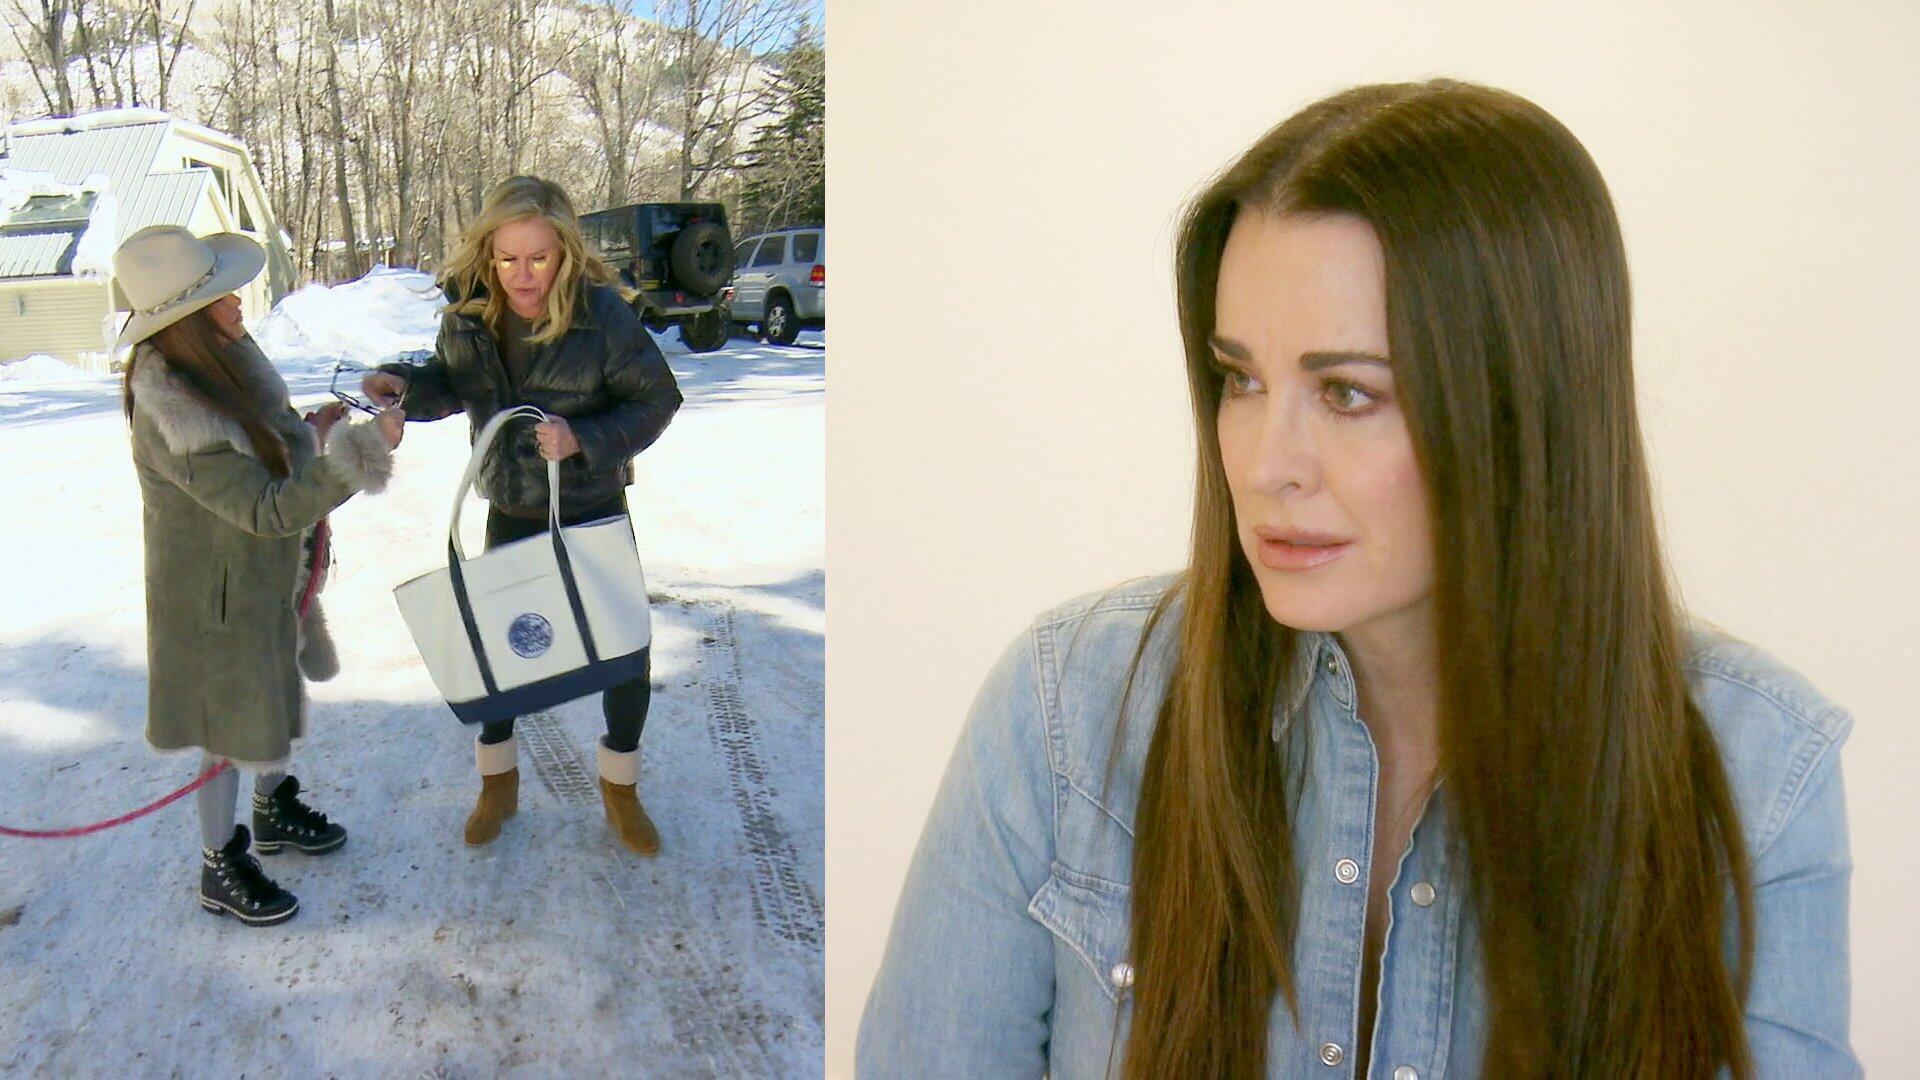 Kyle Richards - The Real Housewives of Beverly Hills | Season 12 Episode 18 | Kyle Richards style